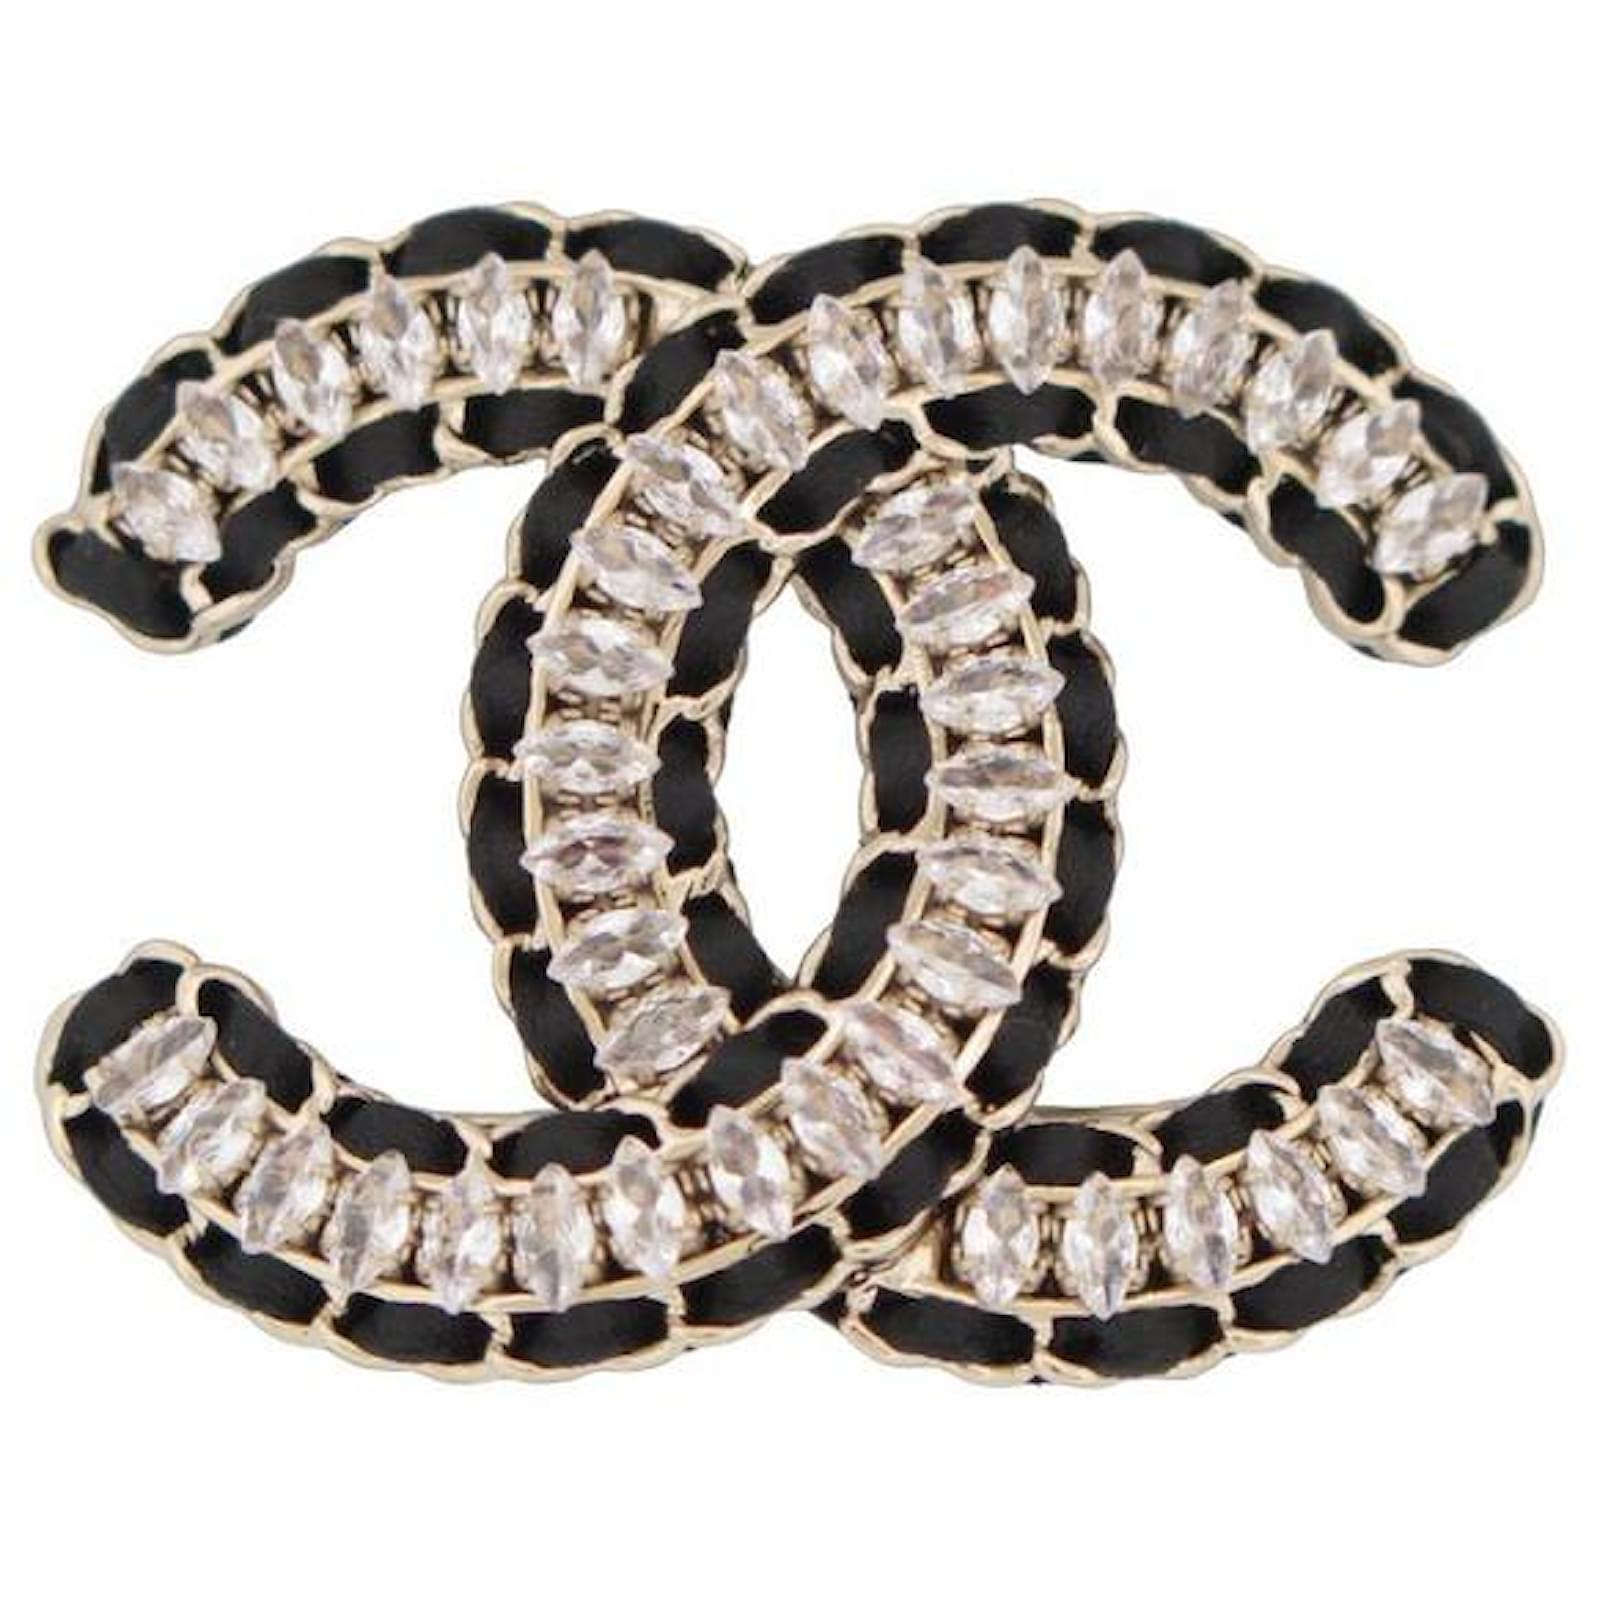 Other Jewelry Chanel New Chanel Brooch CC Logo Strass and Interlace Leather Metal Steel Gold Brooch New